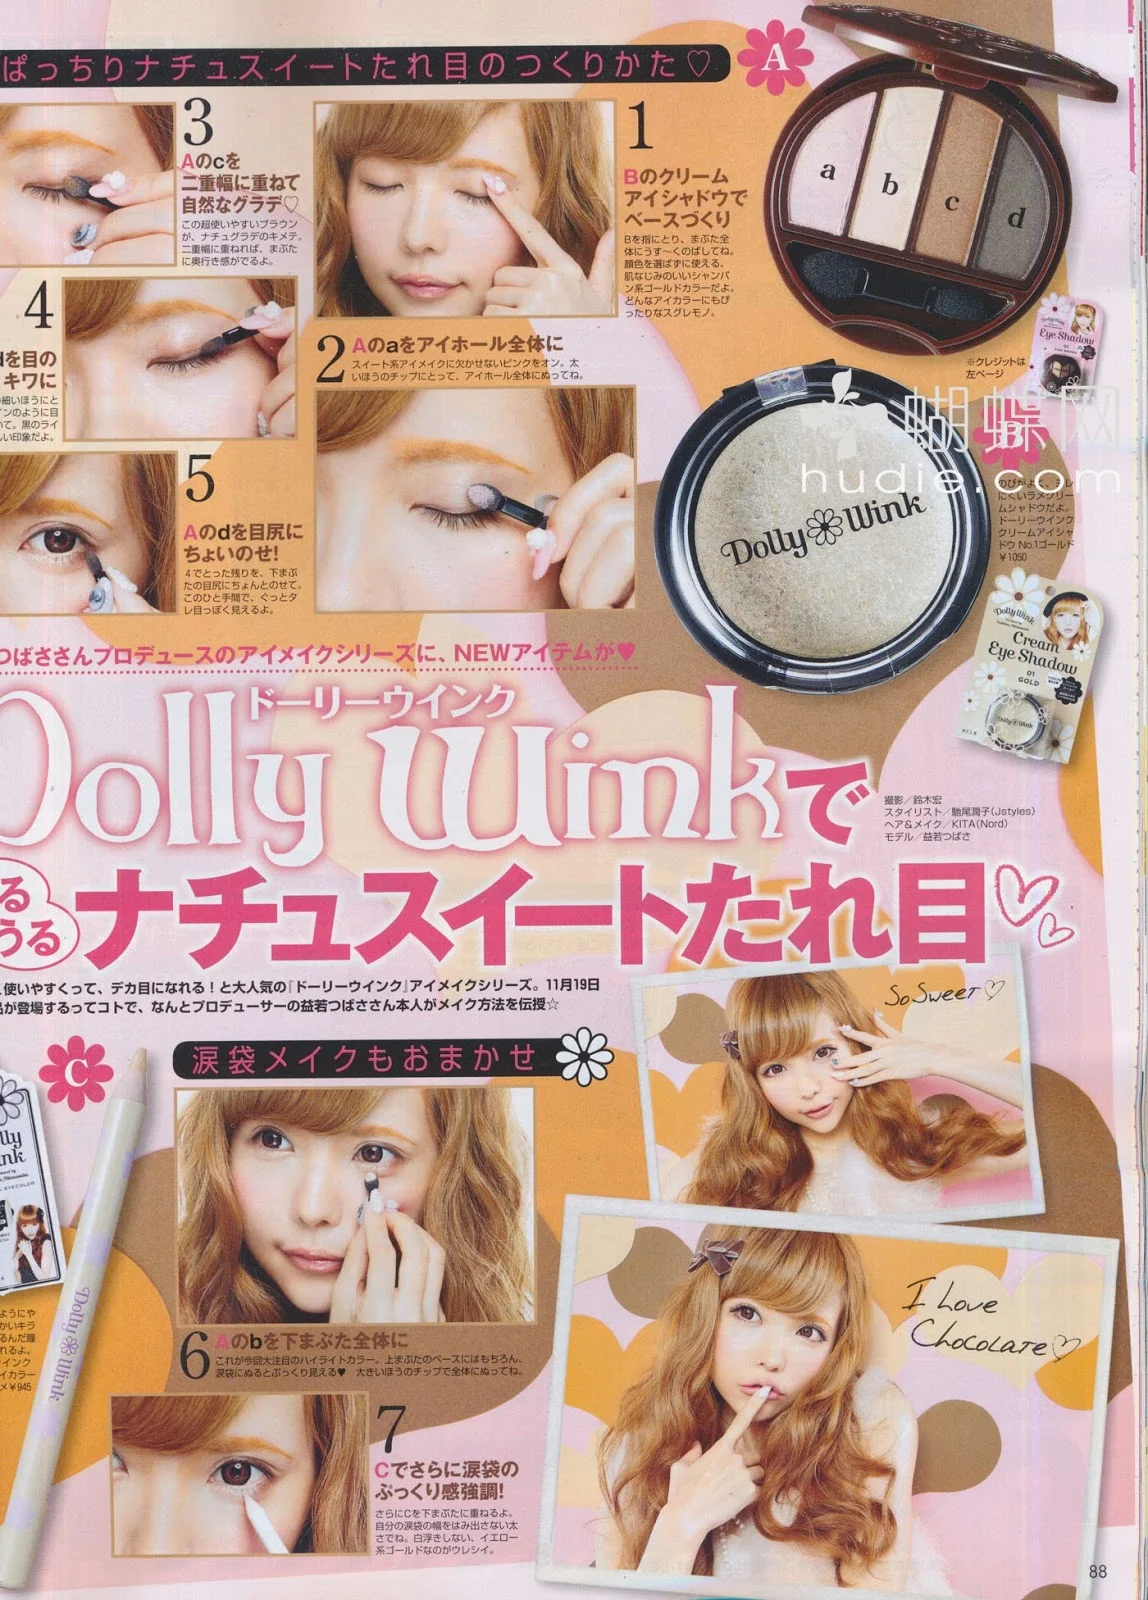 SWEET HONEYDEW Japanese Makeup And Skincare From Popteen